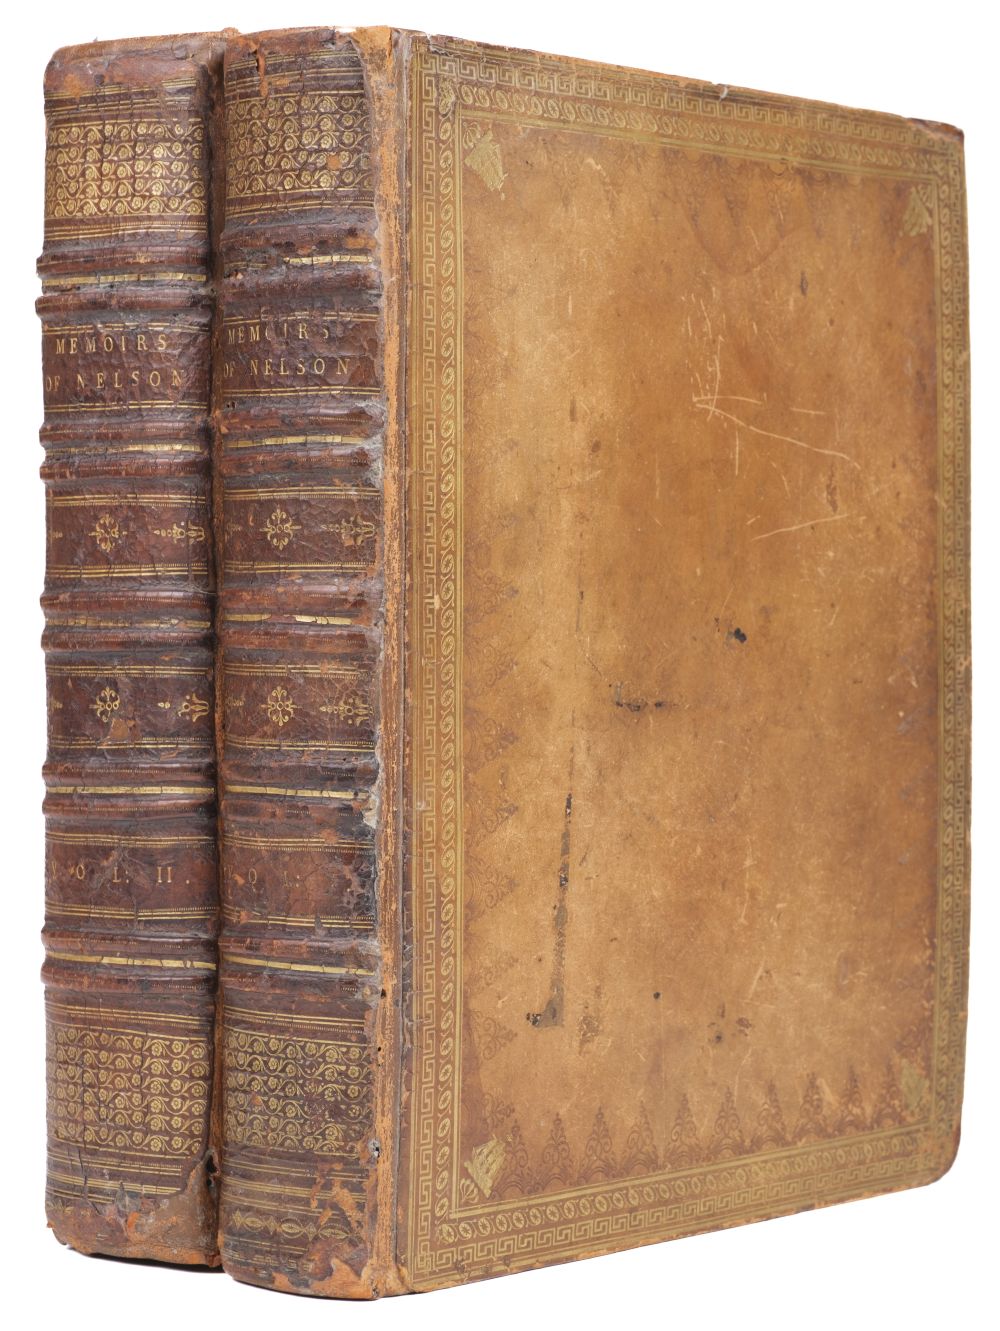 Clarke (James). The Life of Admiral Lord Nelson, 1st edition, 2 volumes, 1809